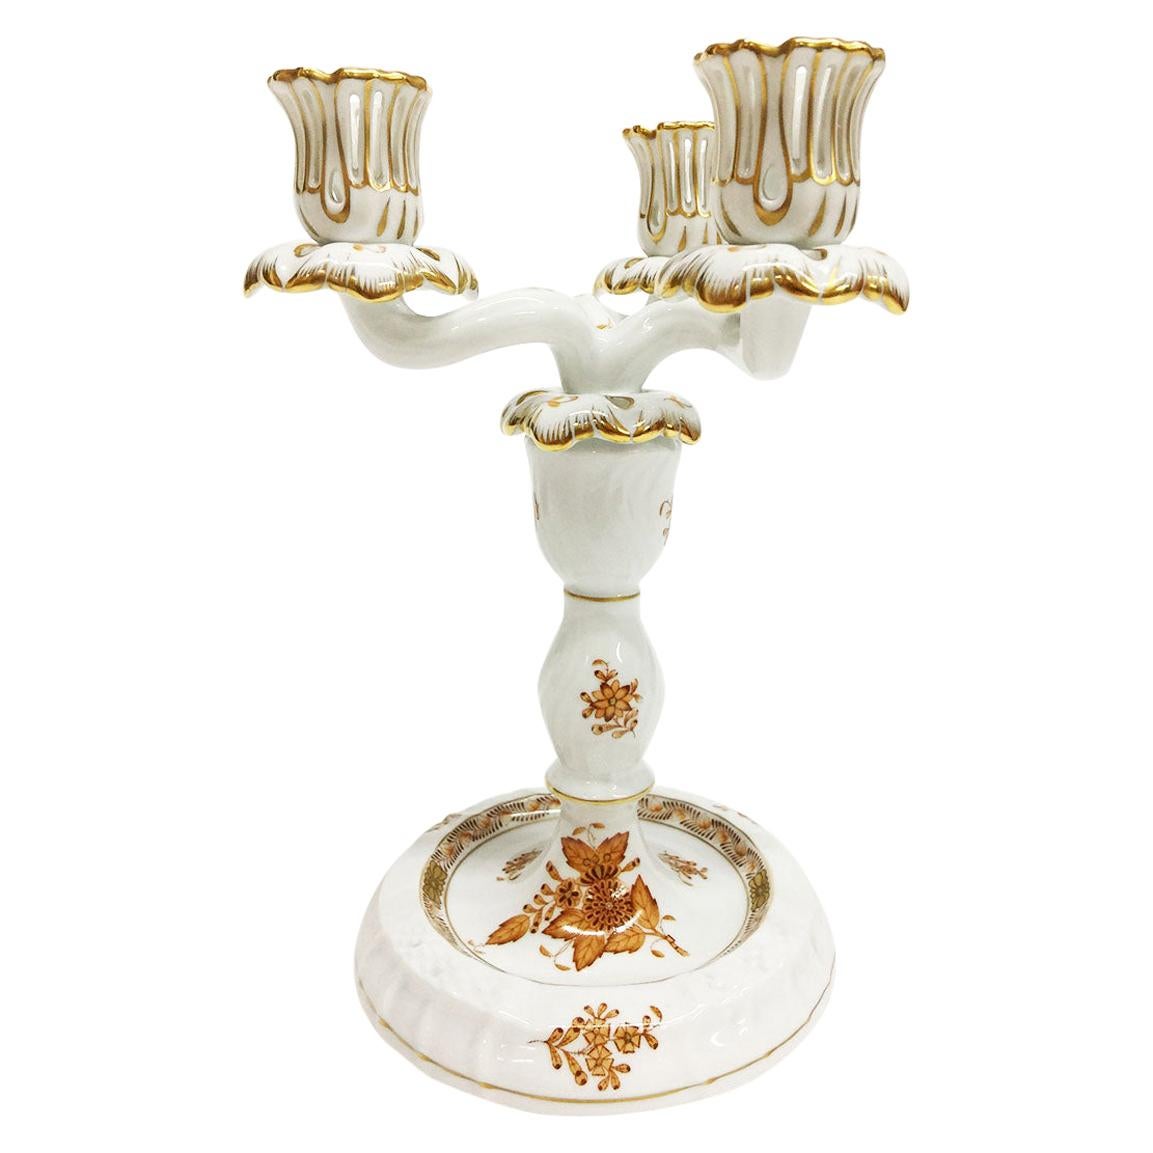 Herend Hungary Porcelain "Chinese Bouquet Apponyi Rust" Candleholder